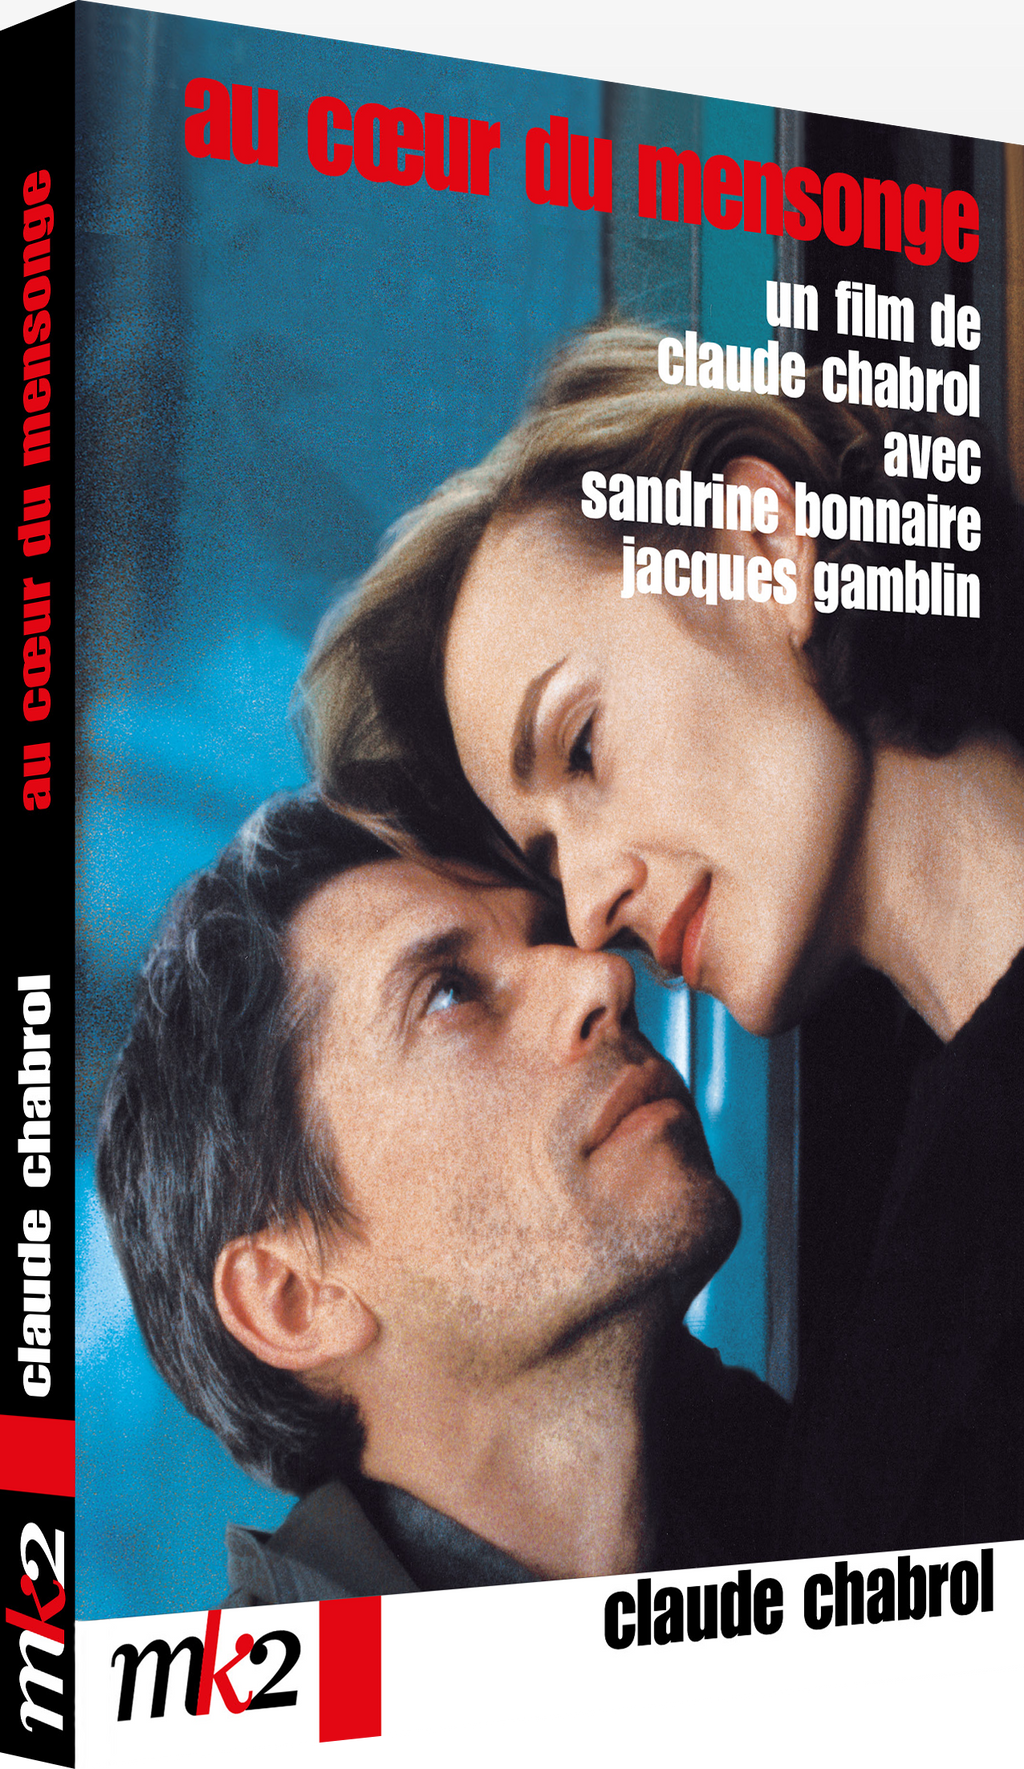 At the heart of the lie by Claude Chabrol